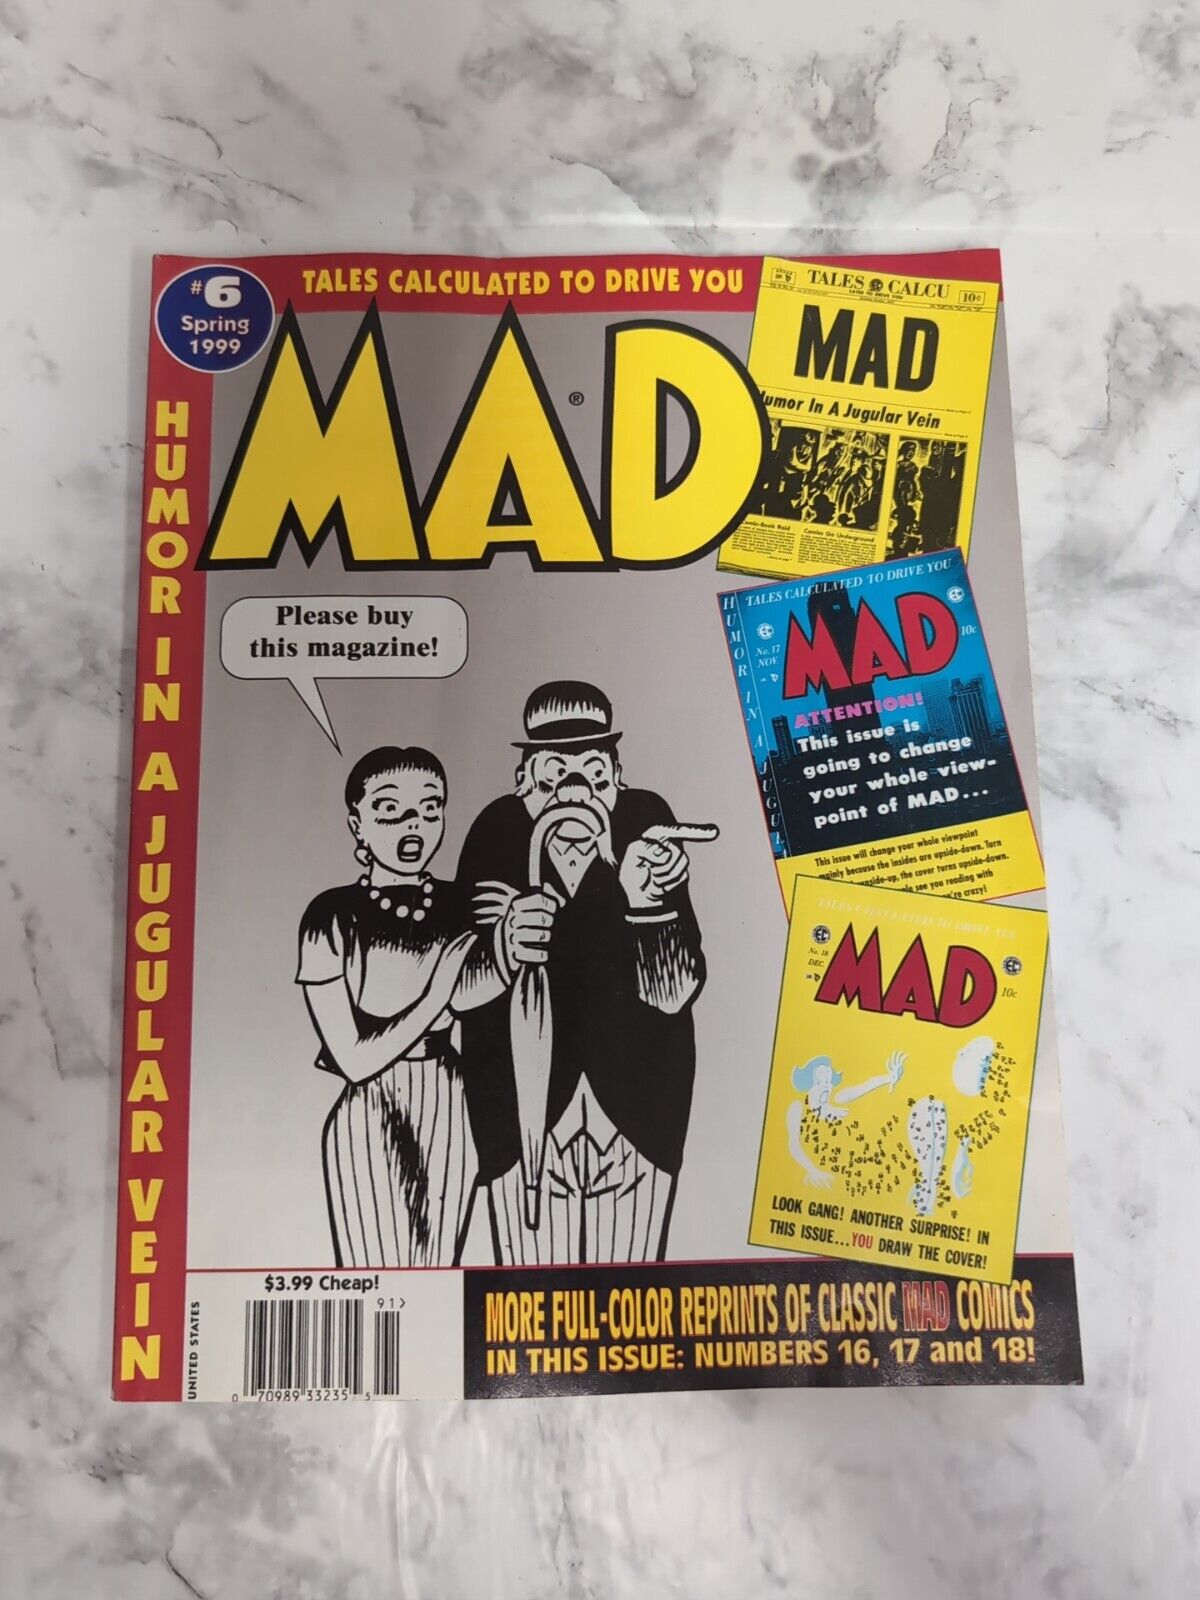 Mad Magazine - Tales Calculated to drive you MAD #6 Spring 1999 - very good